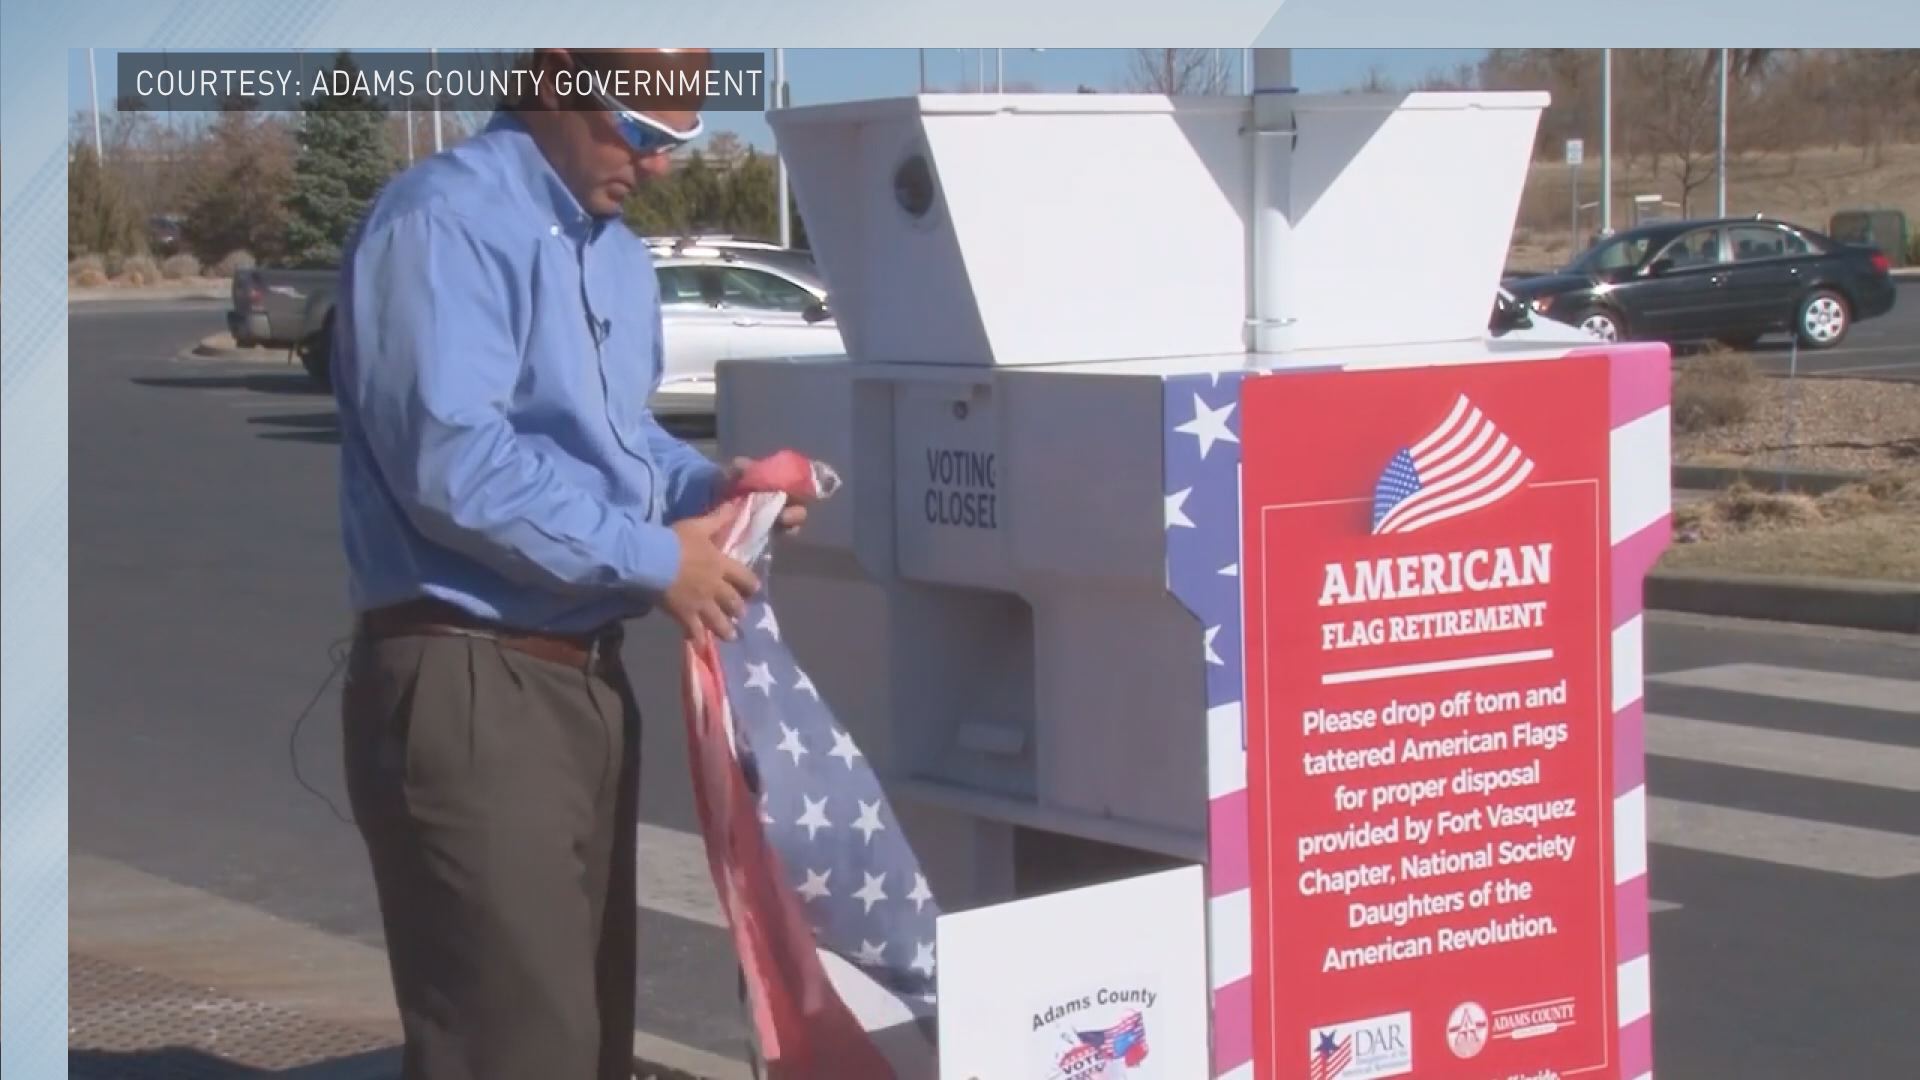 9news.com | Recycle your tattered American Flags in Adams County drop-boxes1920 x 1080